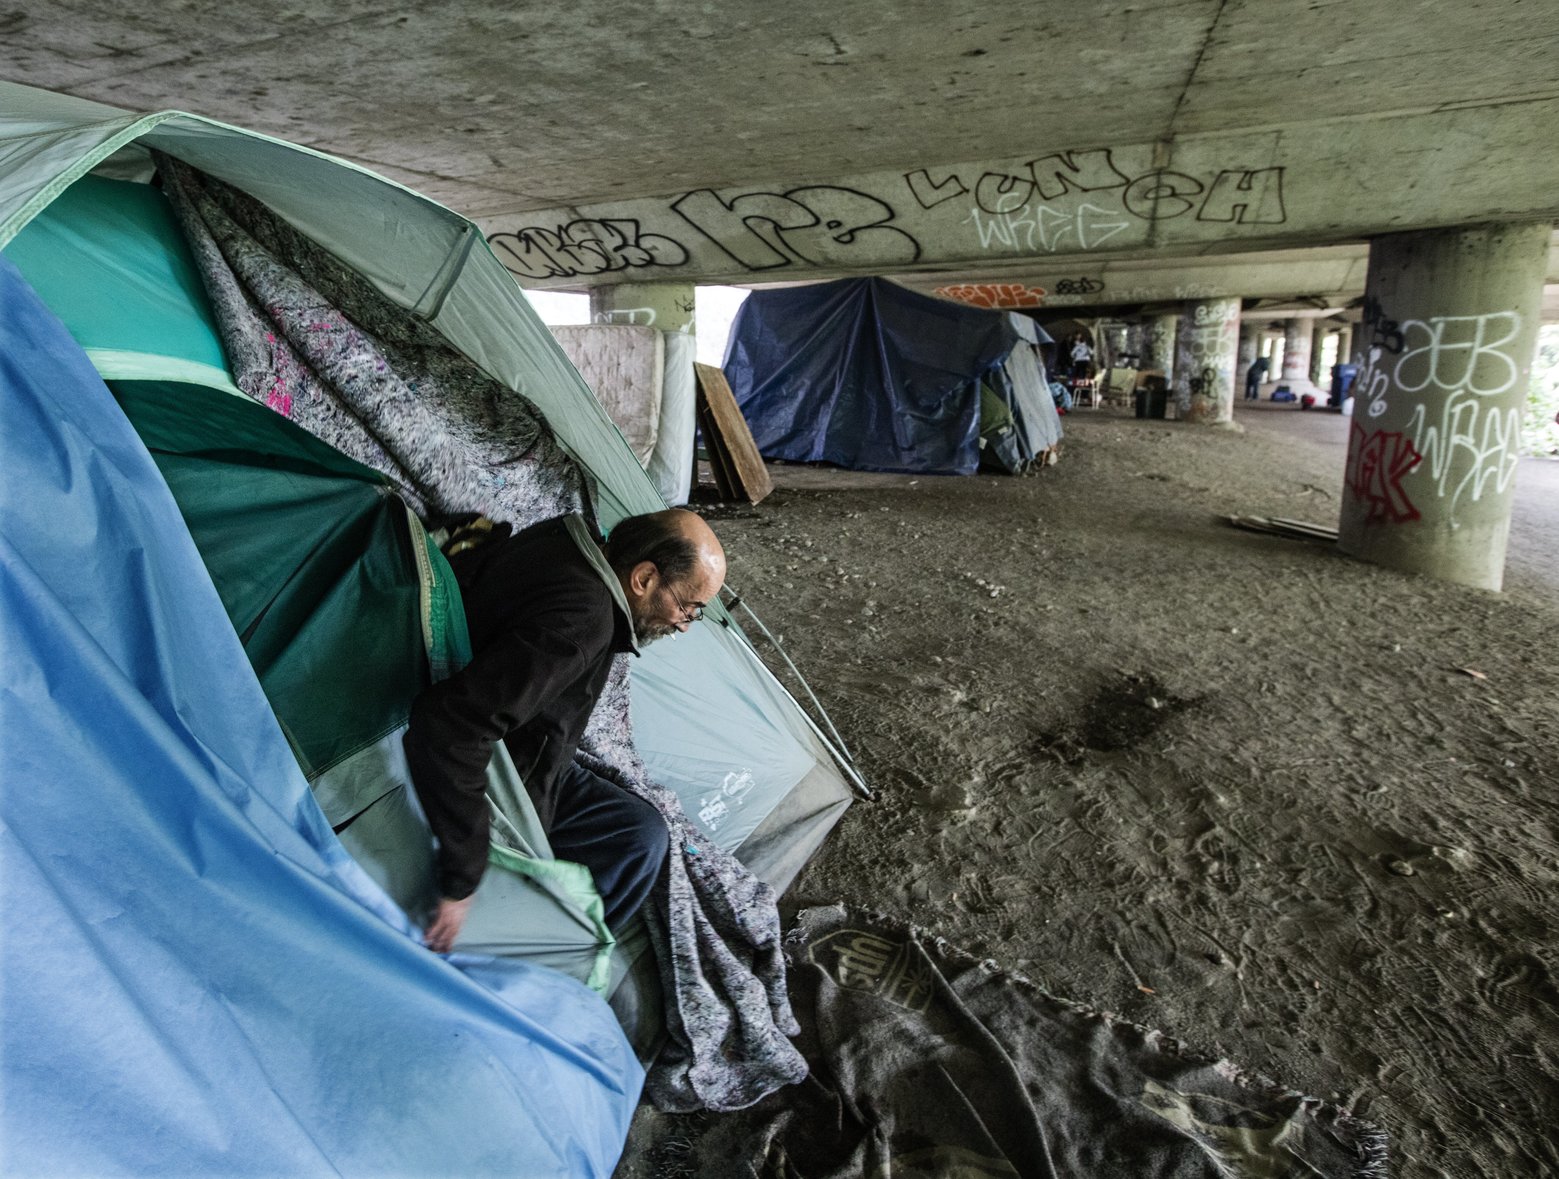 Seattle Aims To Clear Out The Jungle Homeless Camp The Rational Progressive